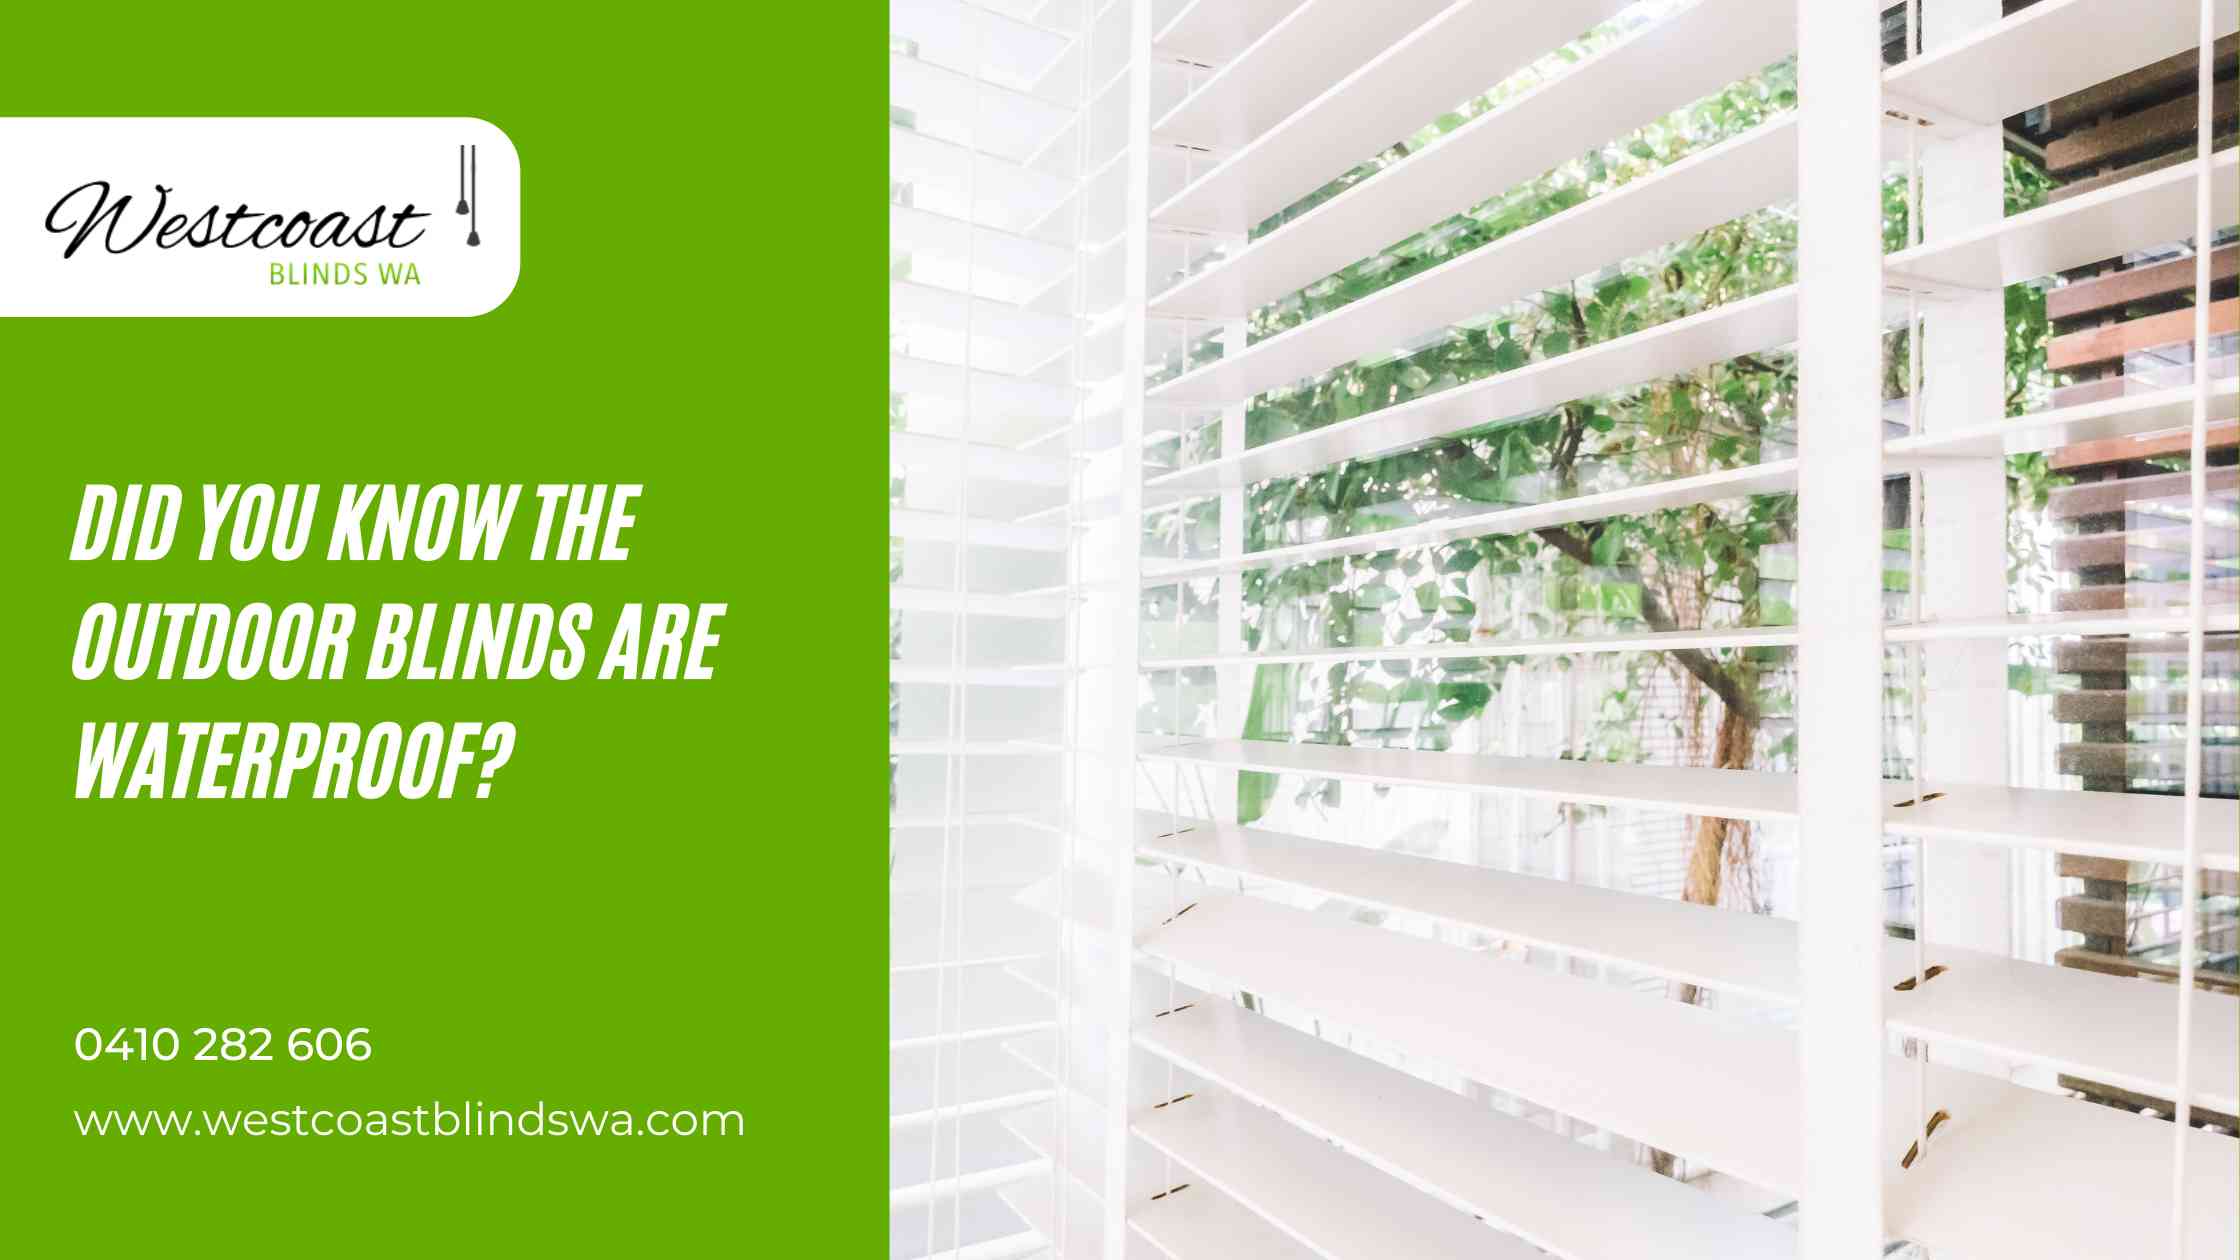 How Do You Know The Outdoor Blinds Are Waterproof?